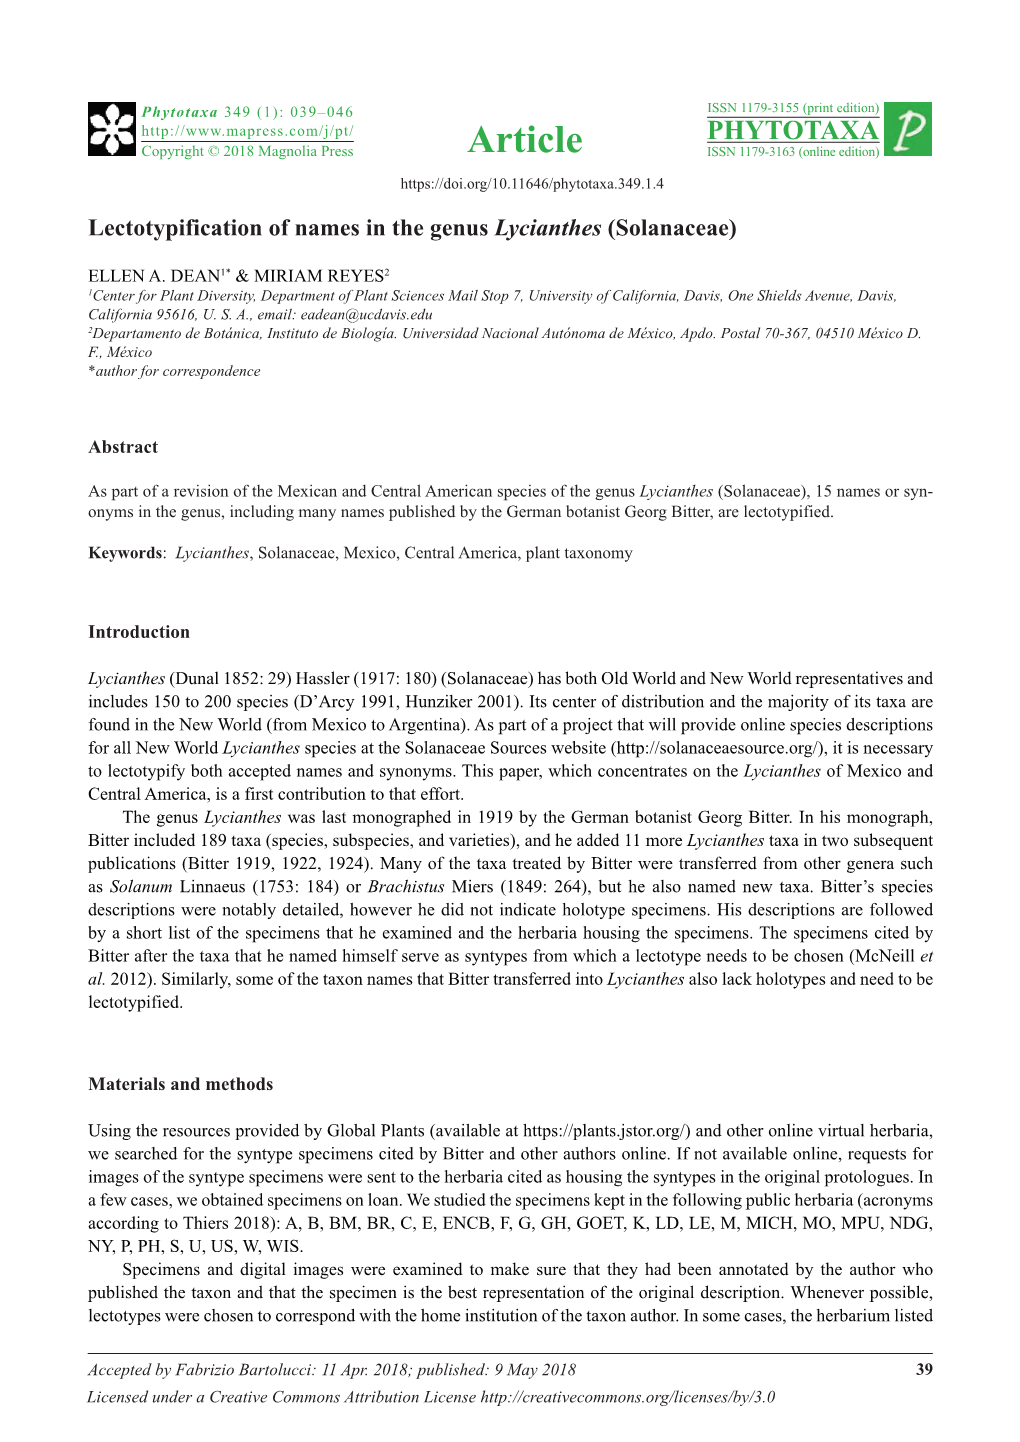 Lectotypification of Names in the Genus Lycianthes (Solanaceae)